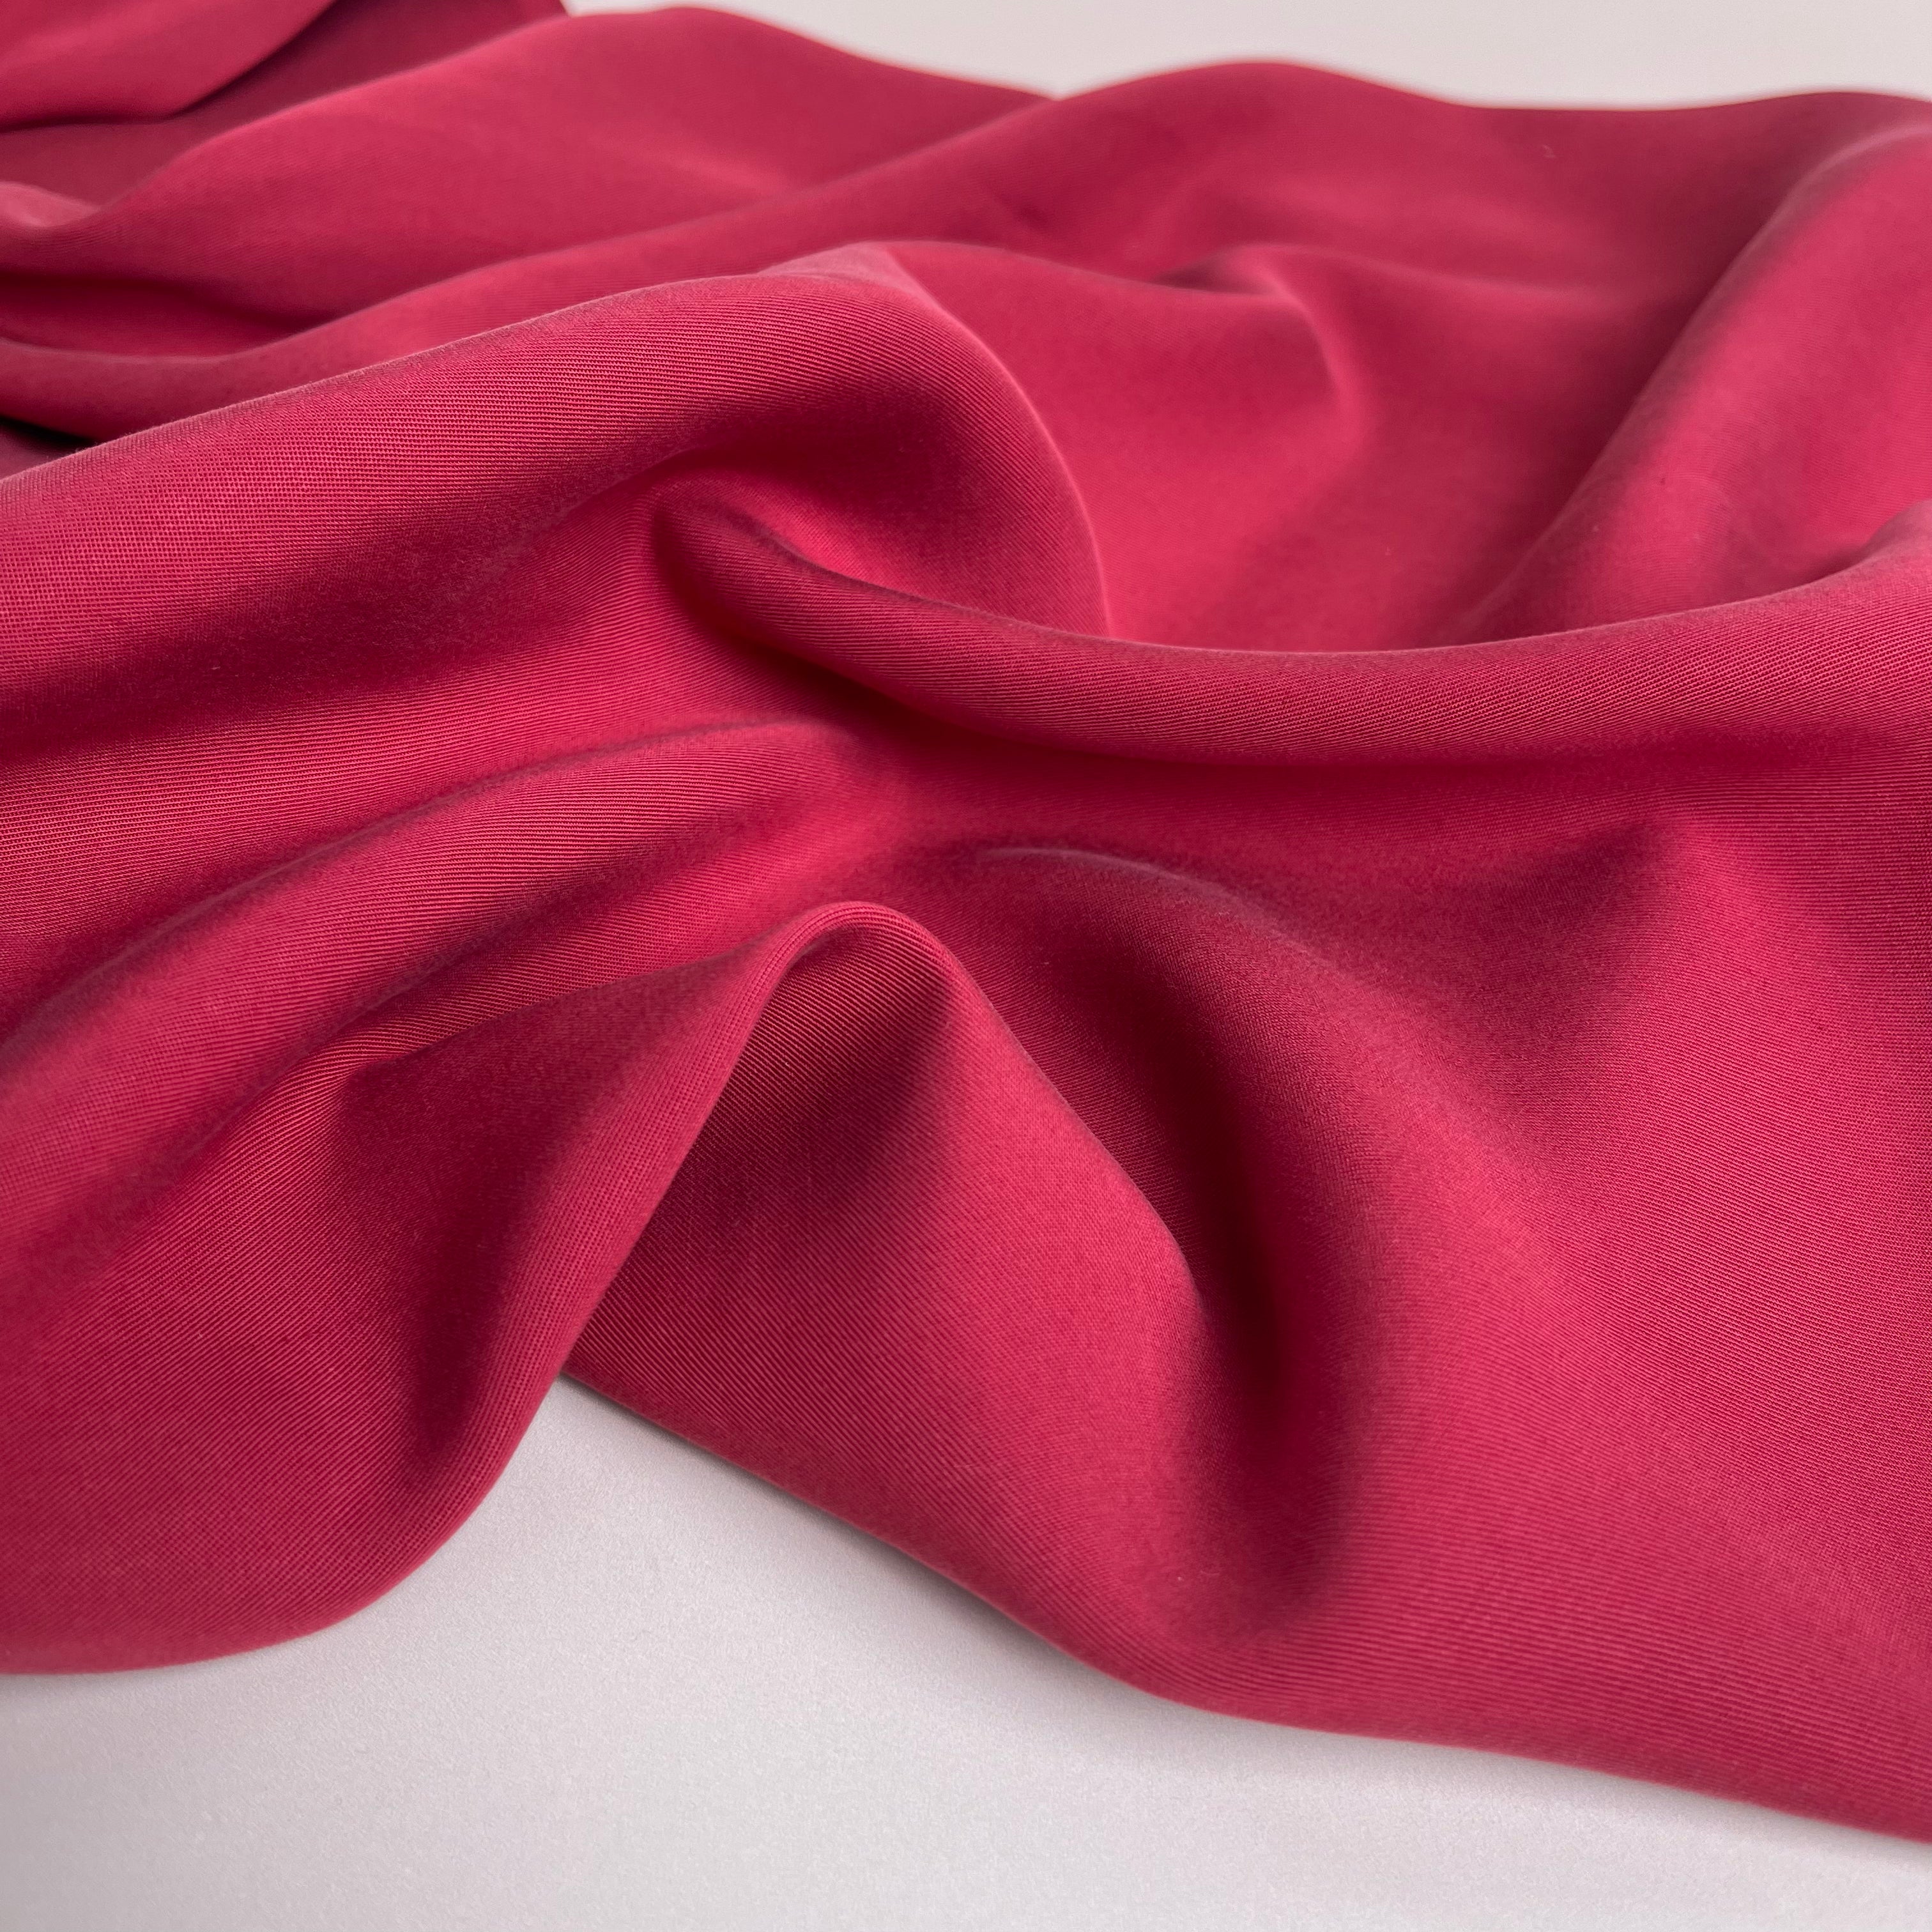 REMNANT 1.36 metre - Lush Sandwashed Lyocell Twill in Red